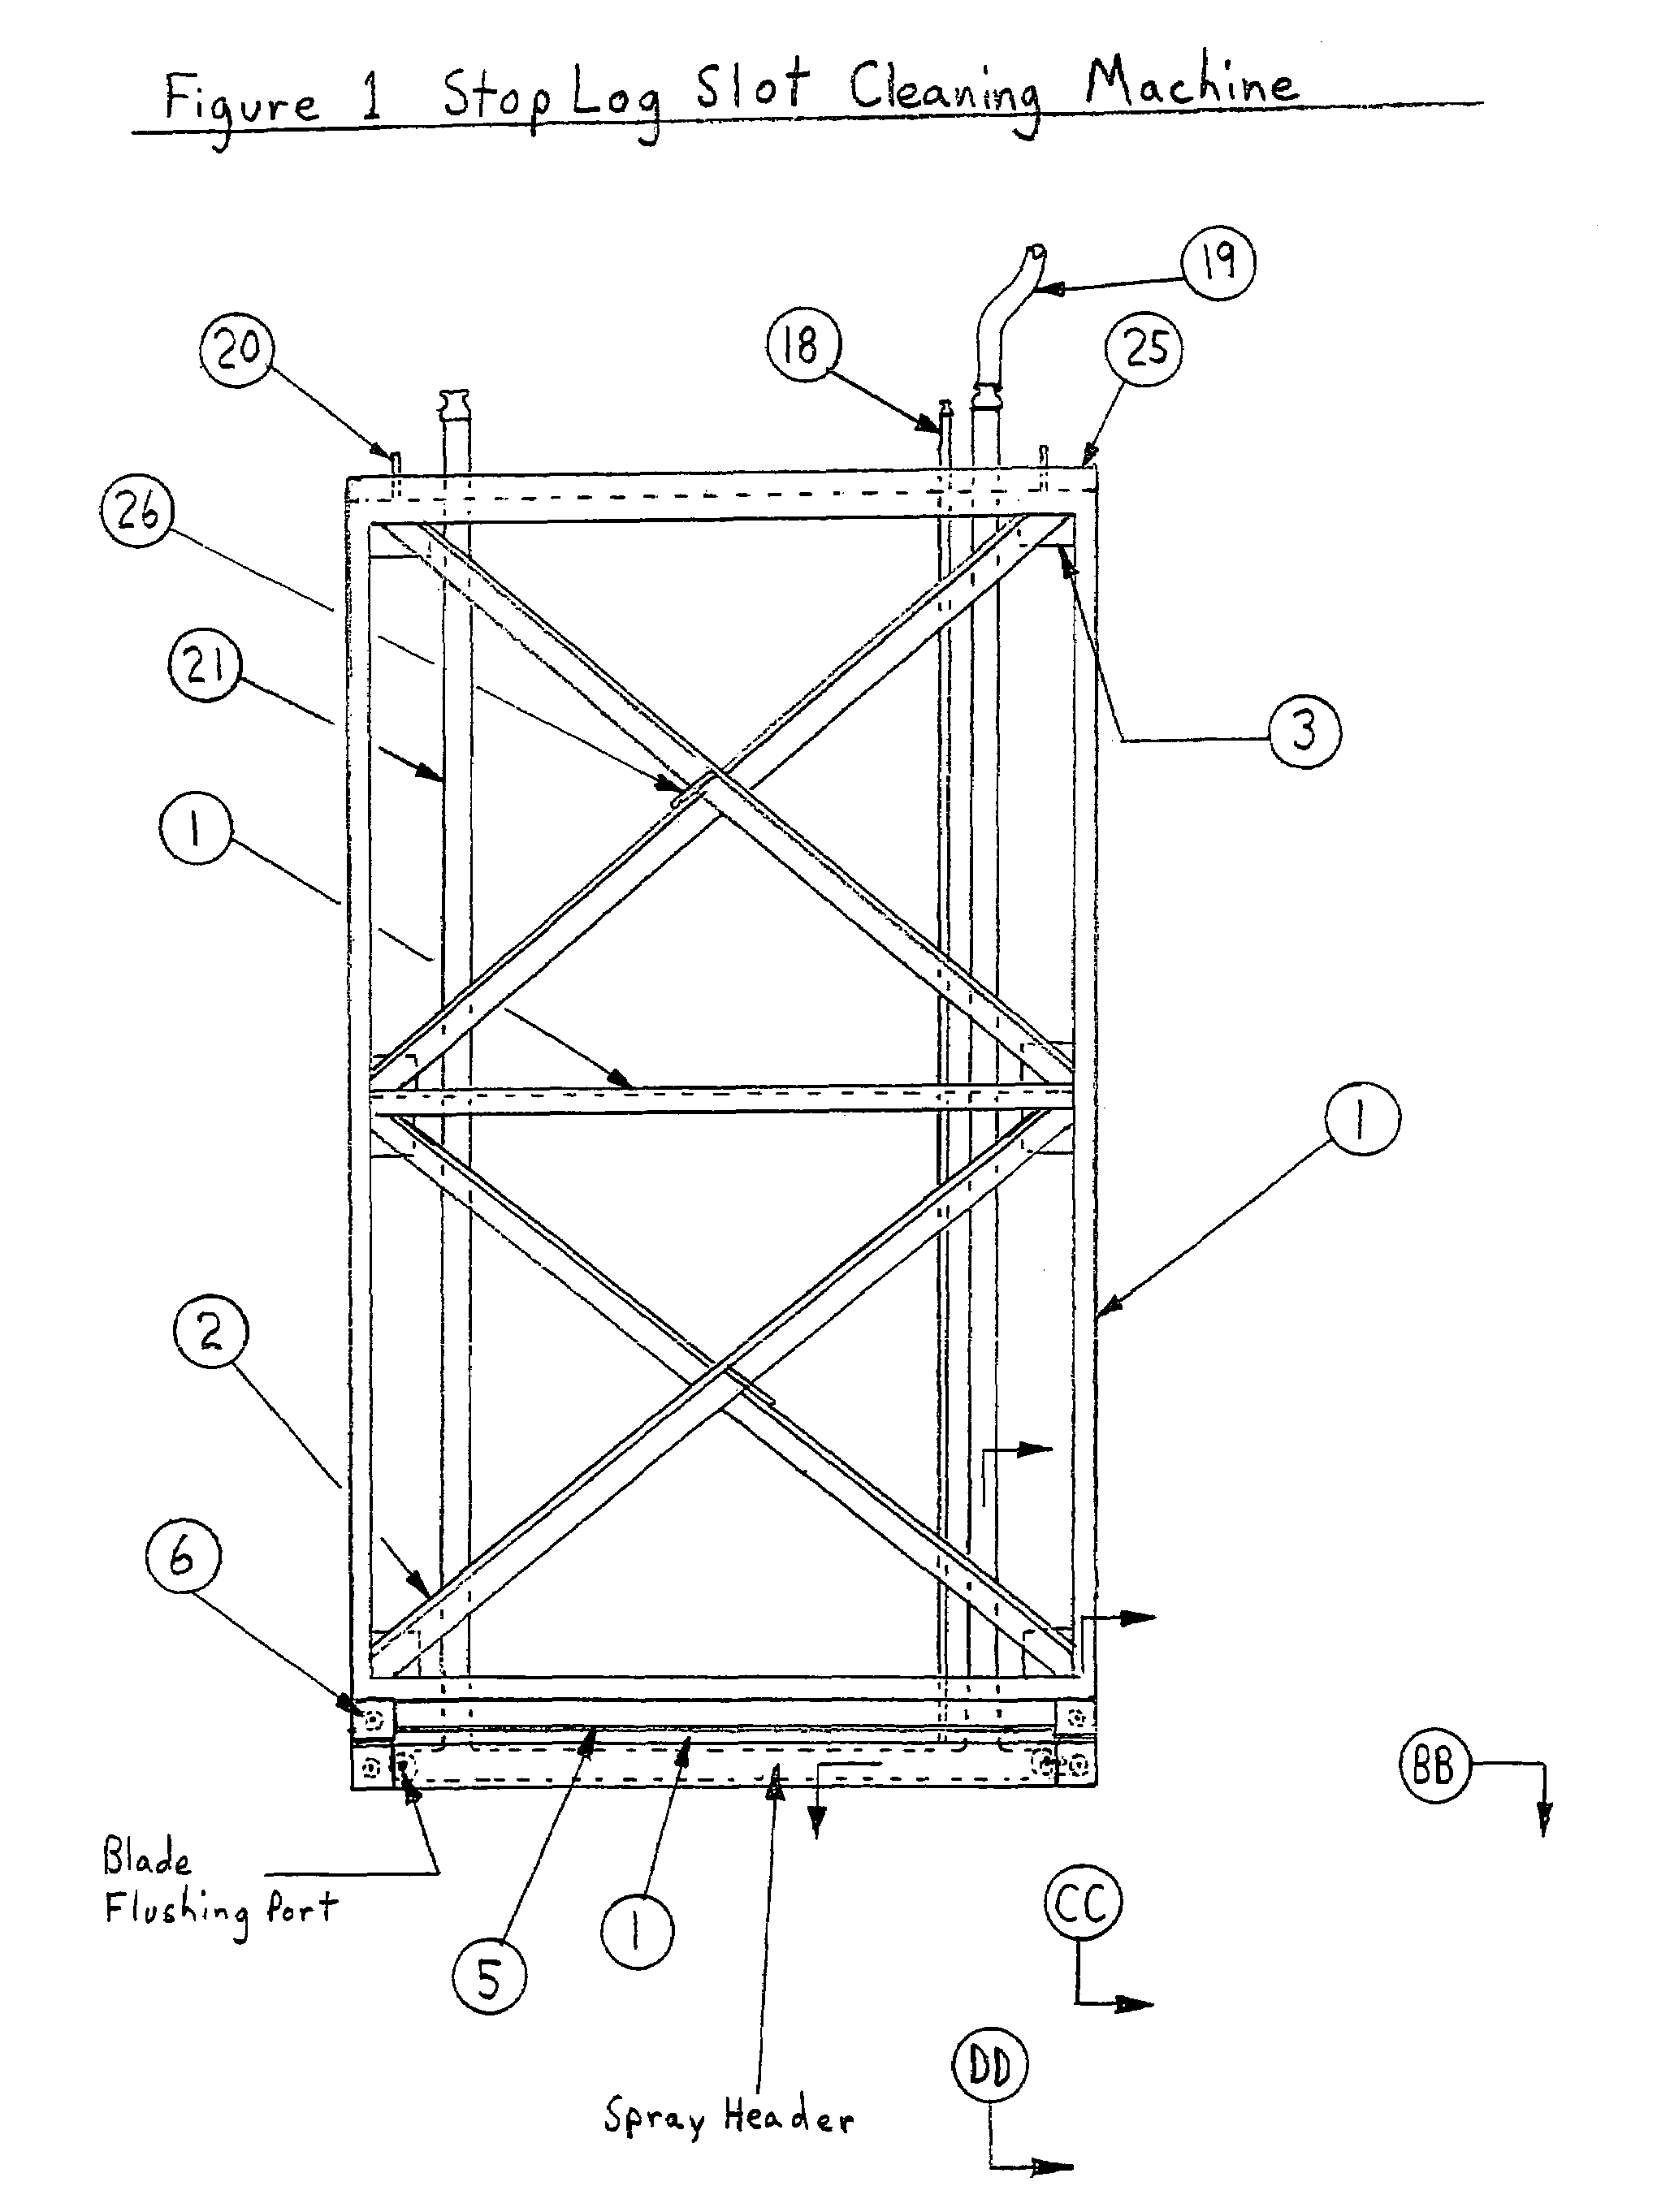 Method and apparatus for stop log slot/guide sealing surface cleaning